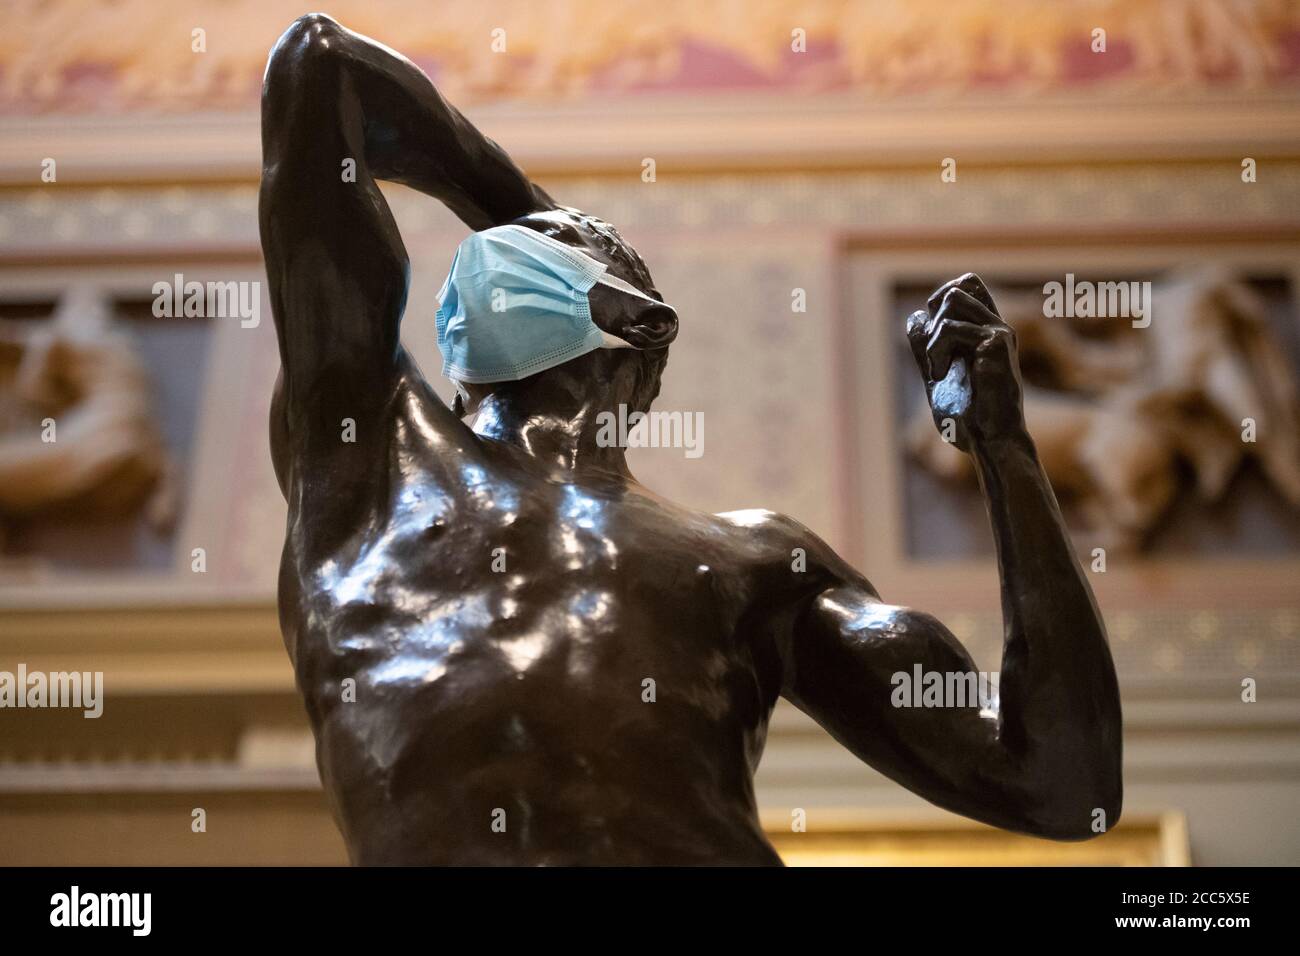 Manchester, UK. 19th Aug, 2020. A face covering is seen on part of the Rodin sculpture 'Eve and Age of Bronze' as Manchester Art Gallery prepares to reopen its doors to the public on Thursday 20th August following temporary closure during the Covid-19 outbreak Credit: Russell Hart/Alamy Live News Stock Photo